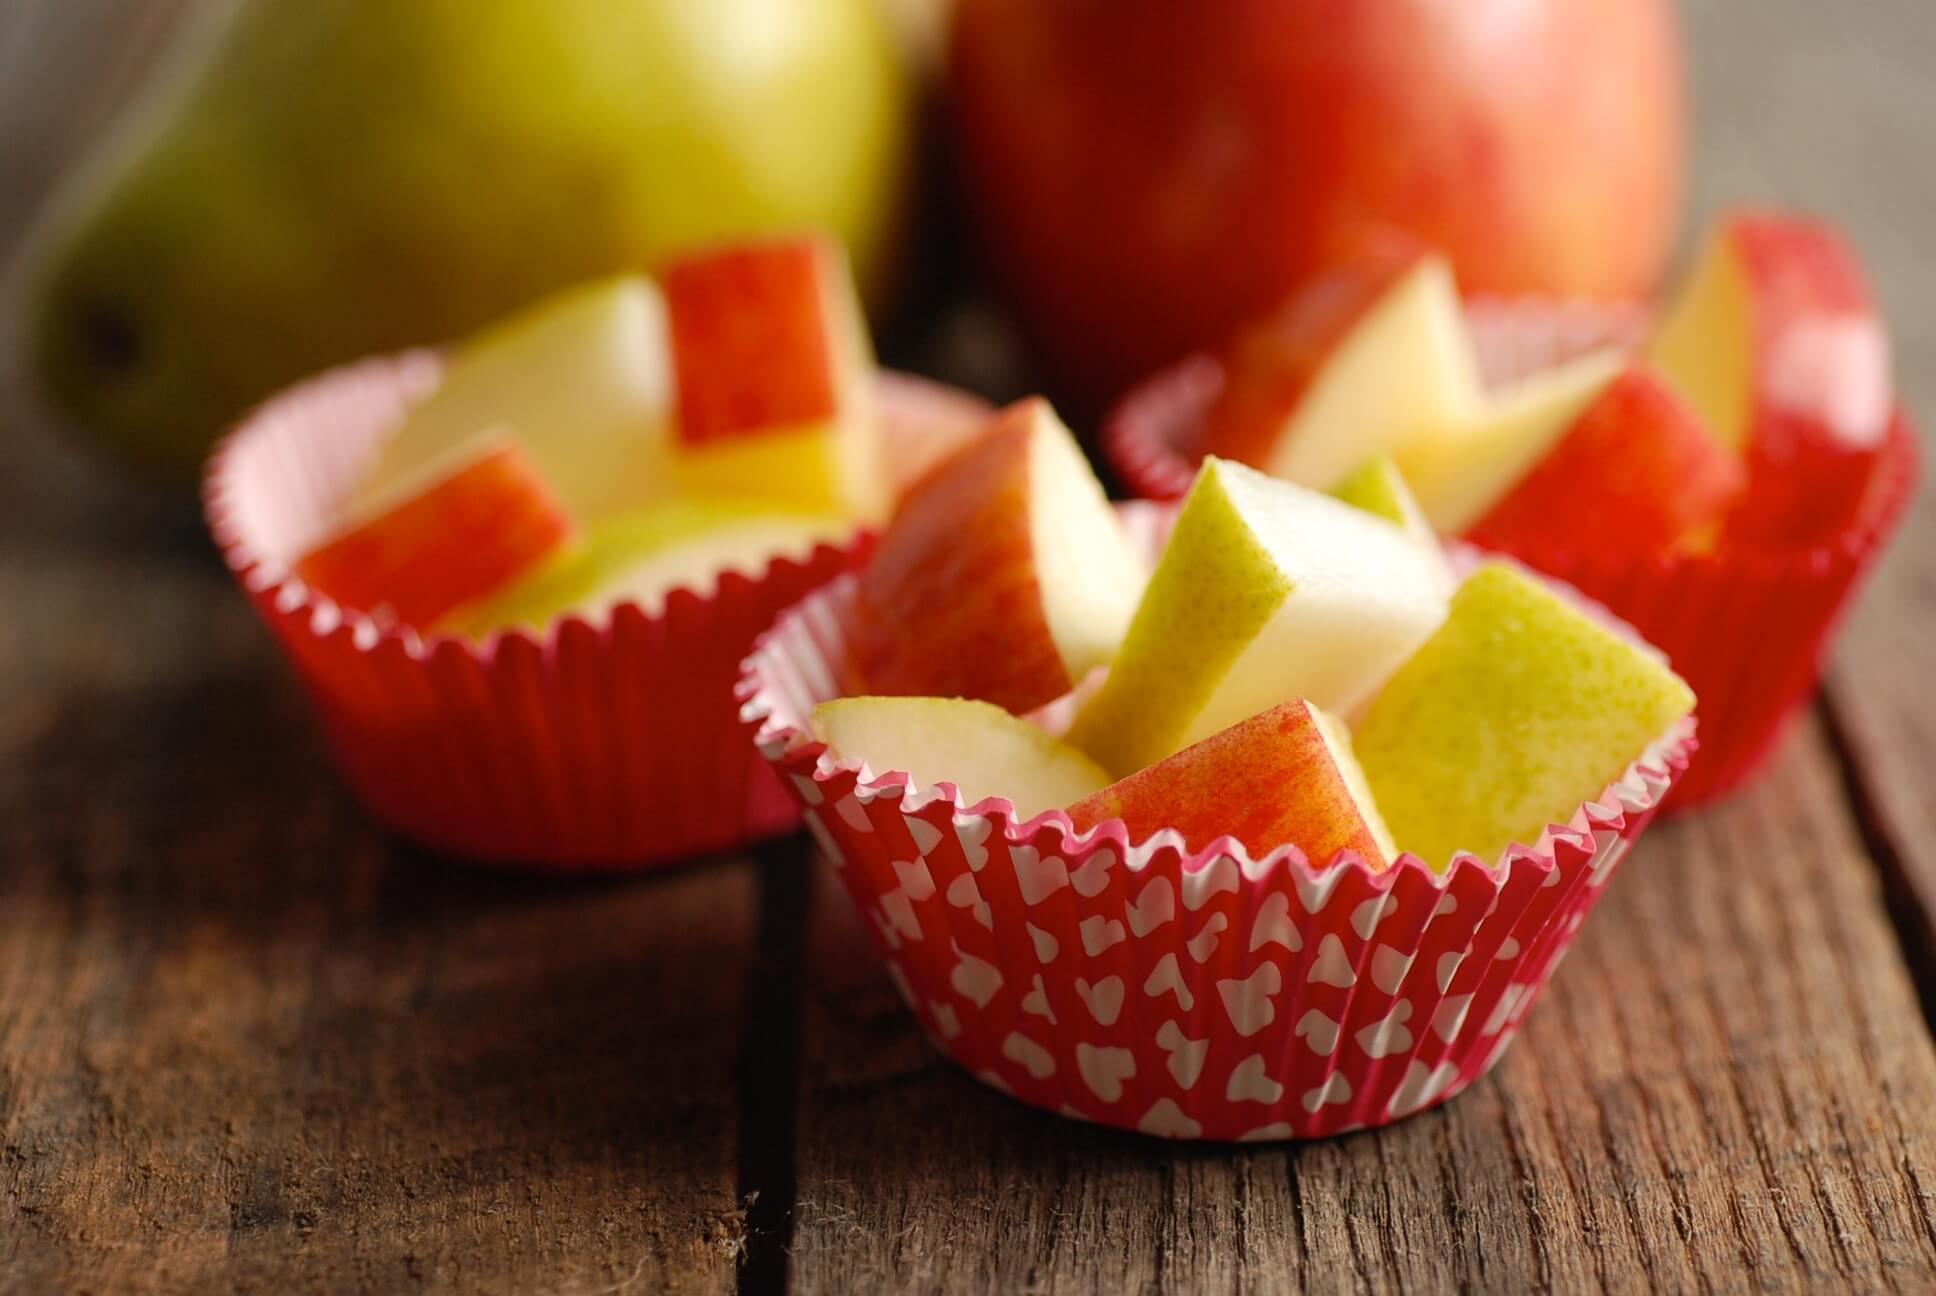 10 Reasons Why Apples & Pears are Good for Your Heart